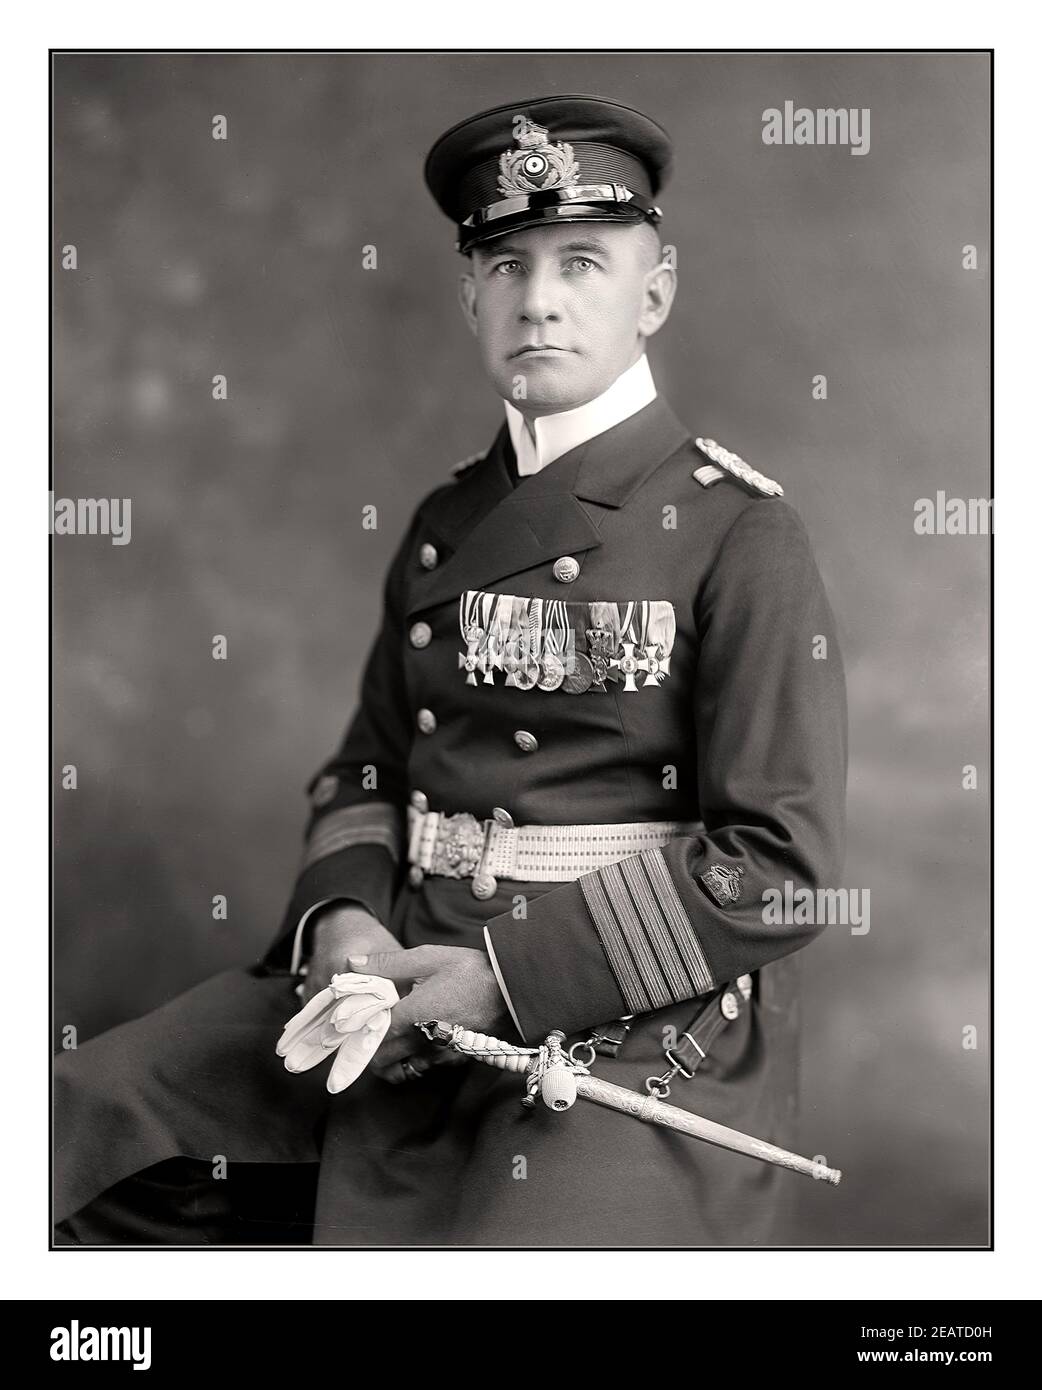 Karl Boy-Ed formal studio portrait of German Commander Karl Boy-Ed (1872-1930) WW1 Karl Boy-Ed (September 14, 1872 –September 14, 1930) was the naval attaché to the German embassy in Washington during World War I. Stock Photo